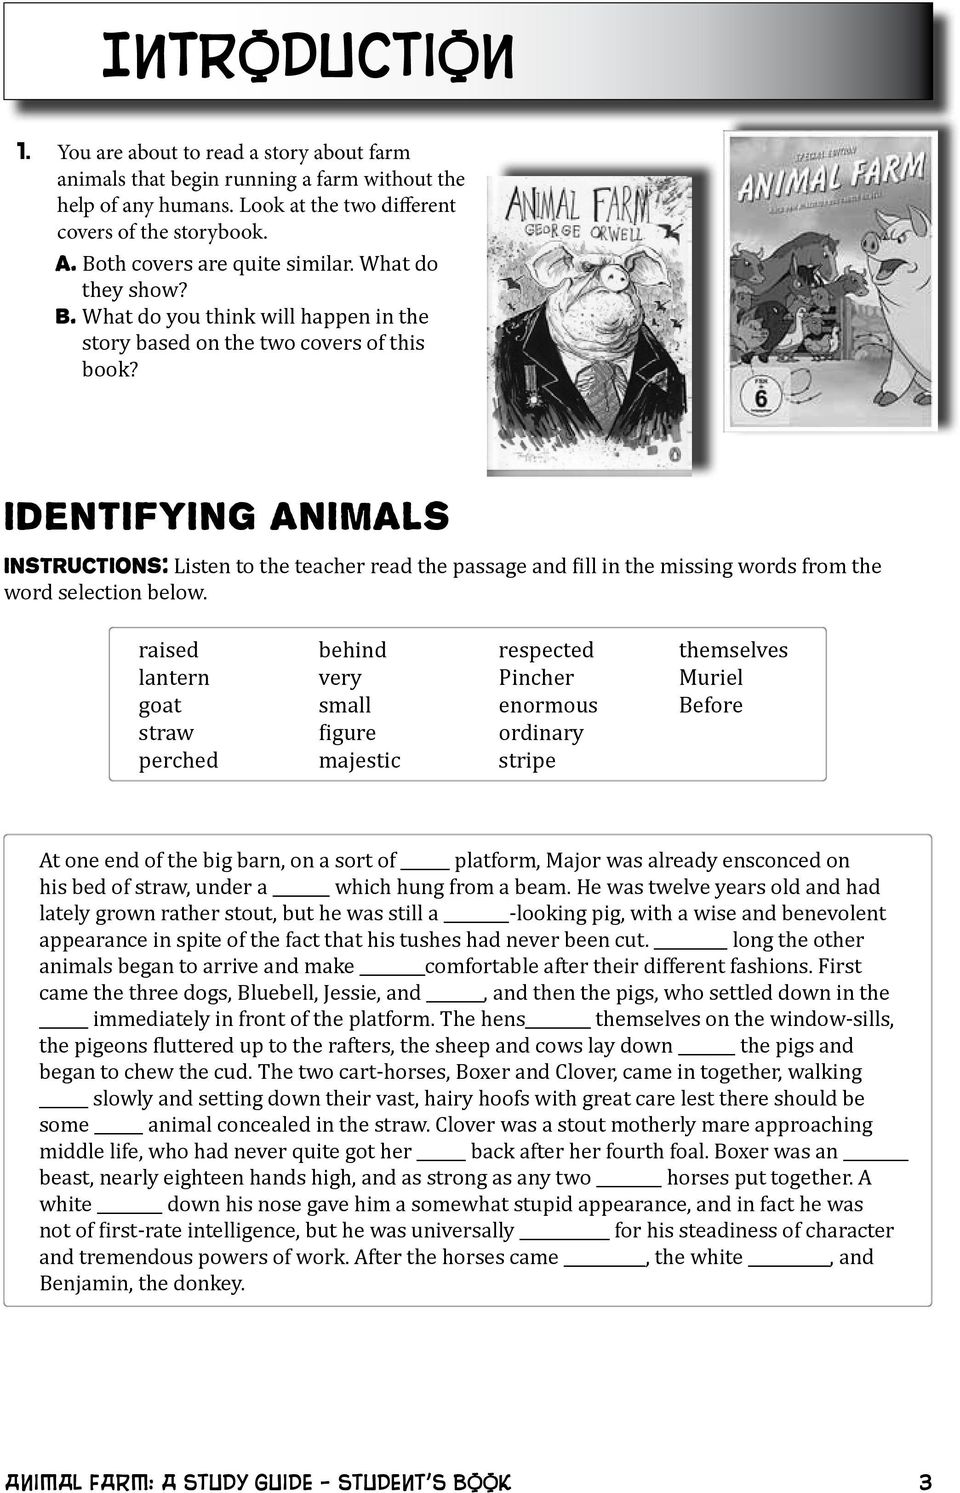 George Orwell s ANIMAL FARM A STUDY GUIDE. Student s Book - PDF Free  Download